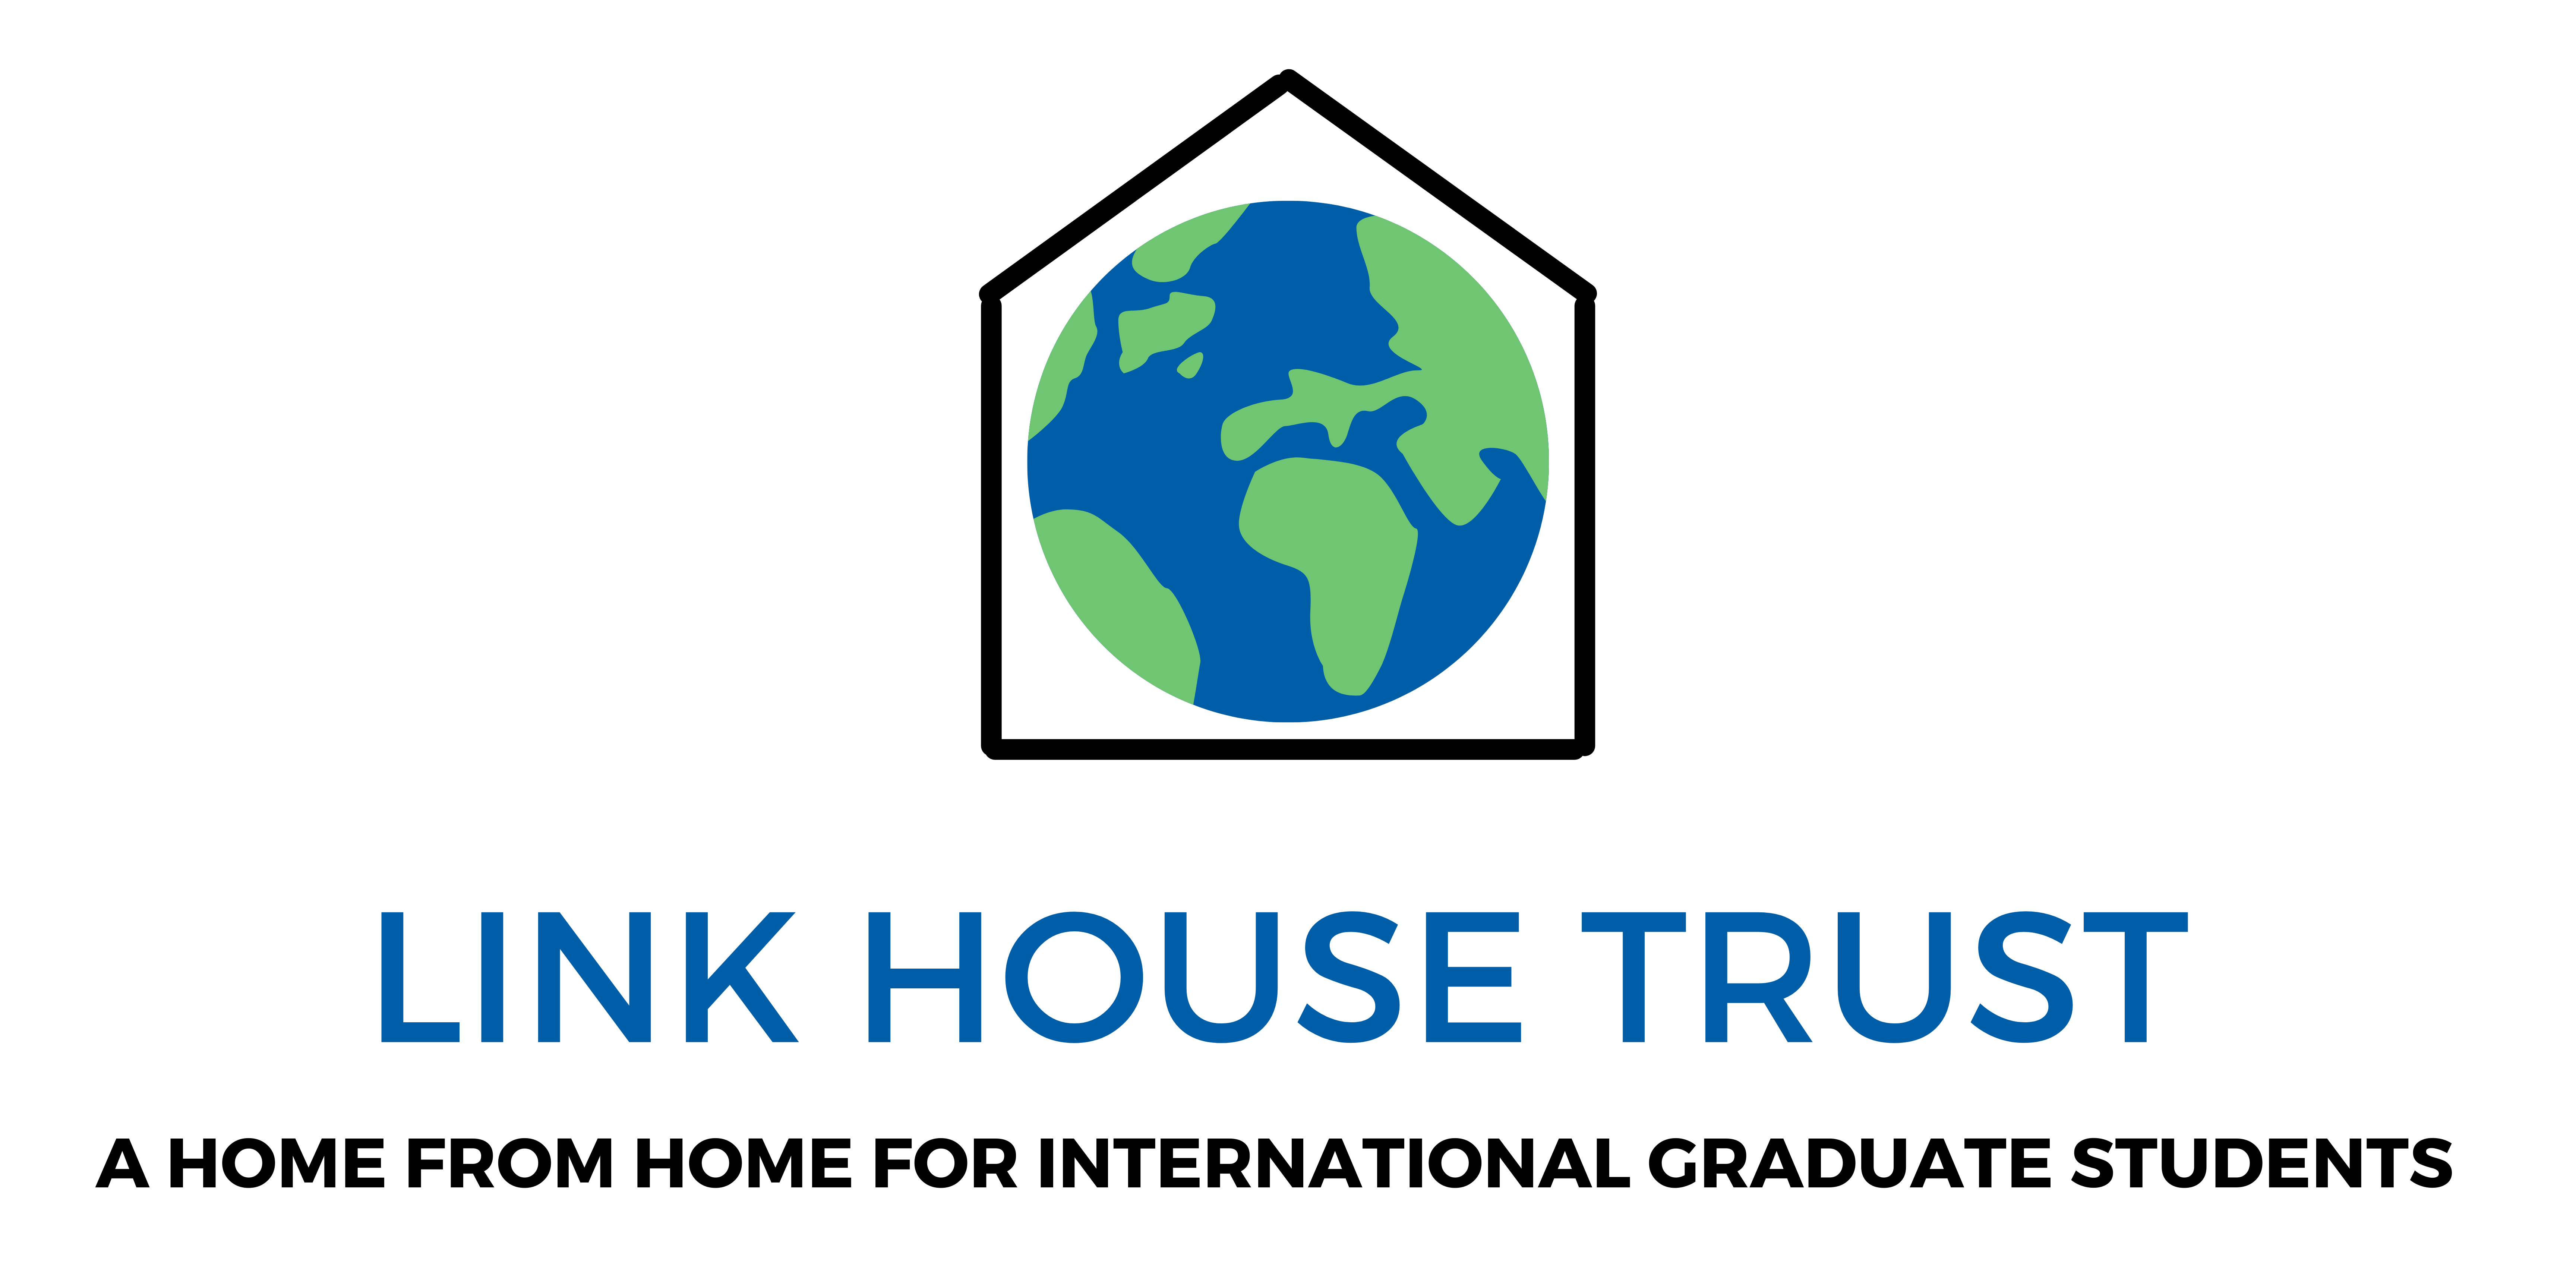 Link House Trust